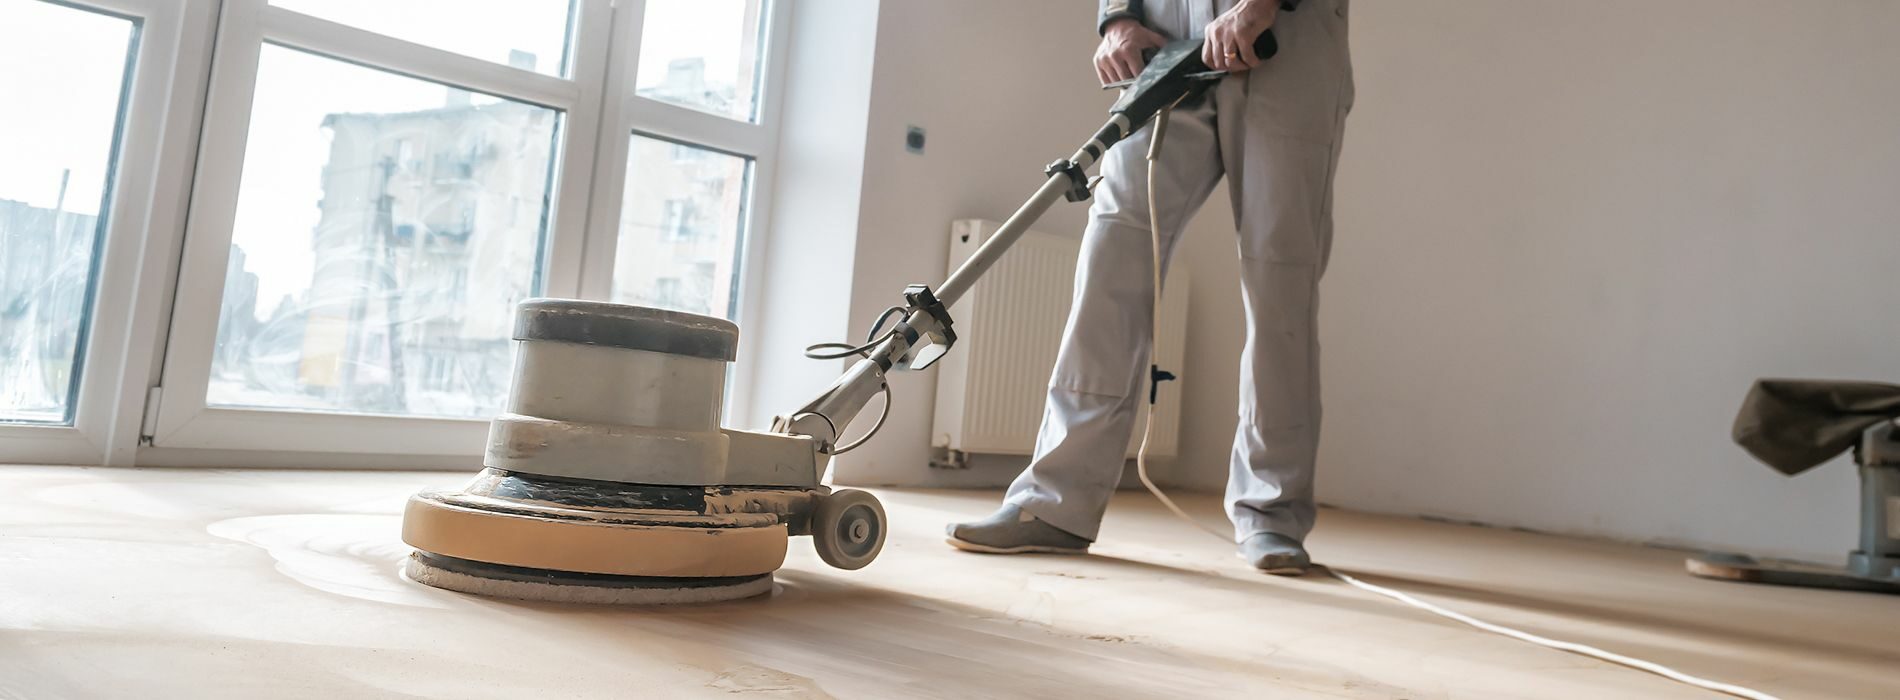 Mr Sander® are utilizing the Bona FlexiSand 1.5, a remarkable sander specifically designed for sanding Parquet floors. With a diameter of 407 mm, it offers an optimal dimension for efficient sanding. Boasting an impressive 1.5 kW power output, it ensures a highly effective sanding process. Operating at a voltage of 230 V and a frequency of 50 Hz/60 Hz, this sander is suitable for various power supply configurations. When paired with the unique Bona Power Drive plate, it enables powerful and direction-free sanding, resulting in a pristine finish by effortlessly removing layers of existing coatings down to the bare wood. The combination guarantees a clean and efficient outcome, leaving the Parquet floor beautifully restored. 